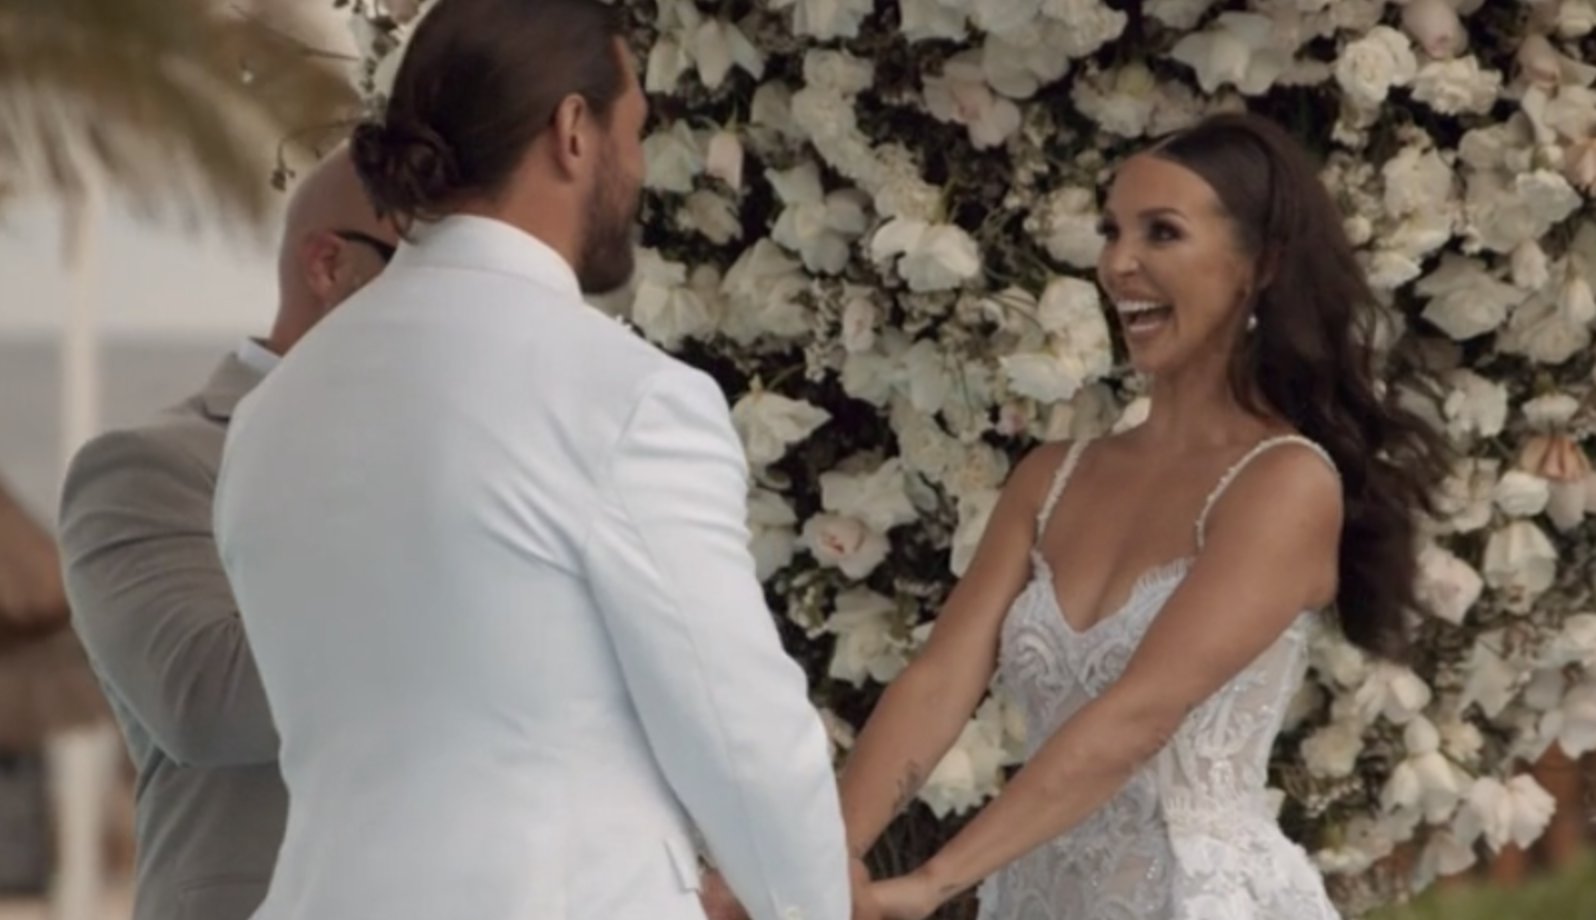 Scheana is standing at the altar in a white dress, with a wall of white roses behind her, looking INCREDIBLY EXCITED and holding hands with Brock who is wearing a white suit